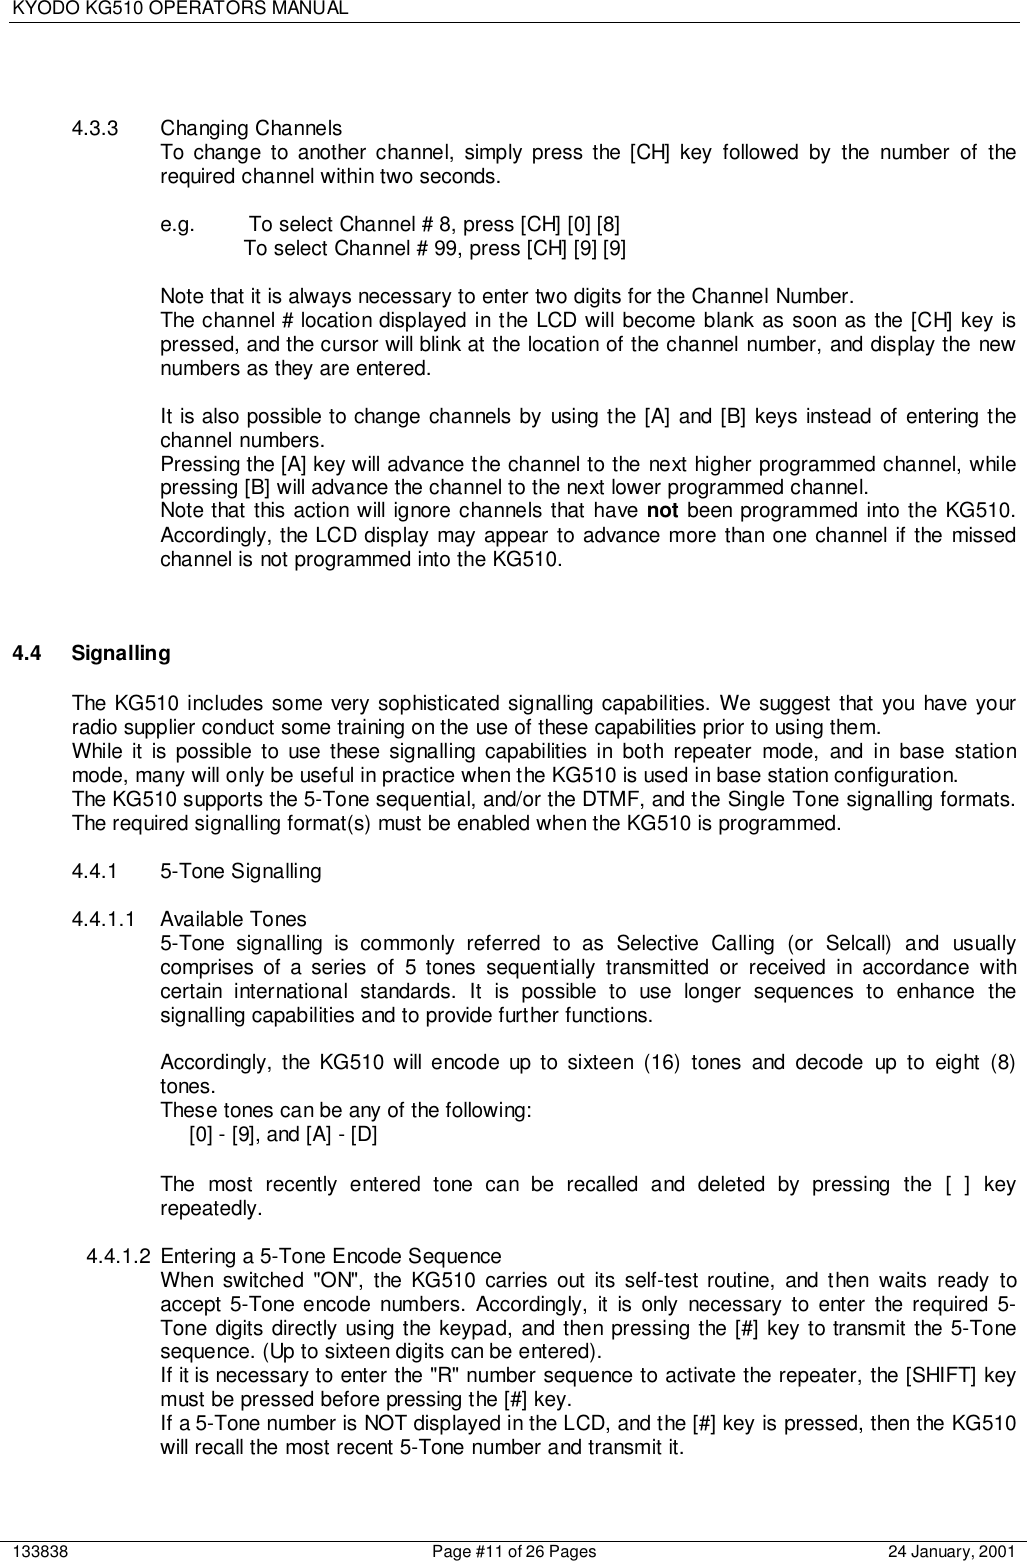 KYODO KG510 OPERATORS MANUAL133838 Page #11 of 26 Pages 24 January, 20014.3.3 Changing ChannelsTo change to another channel, simply press the [CH] key followed by the number of therequired channel within two seconds.e.g.  To select Channel # 8, press [CH] [0] [8]To select Channel # 99, press [CH] [9] [9]Note that it is always necessary to enter two digits for the Channel Number.The channel # location displayed in the LCD will become blank as soon as the [CH] key ispressed, and the cursor will blink at the location of the channel number, and display the newnumbers as they are entered.It is also possible to change channels by using the [A] and [B] keys instead of entering thechannel numbers.Pressing the [A] key will advance the channel to the next higher programmed channel, whilepressing [B] will advance the channel to the next lower programmed channel.Note that this action will ignore channels that have not been programmed into the KG510.Accordingly, the LCD display may appear to advance more than one channel if the missedchannel is not programmed into the KG510.4.4 SignallingThe KG510 includes some very sophisticated signalling capabilities. We suggest that you have yourradio supplier conduct some training on the use of these capabilities prior to using them.While it is possible to use these signalling capabilities in both repeater mode, and in base stationmode, many will only be useful in practice when the KG510 is used in base station configuration.The KG510 supports the 5-Tone sequential, and/or the DTMF, and the Single Tone signalling formats.The required signalling format(s) must be enabled when the KG510 is programmed.4.4.1 5-Tone Signalling4.4.1.1 Available Tones5-Tone signalling is commonly referred to as Selective Calling (or Selcall) and usuallycomprises of a series of 5 tones sequentially transmitted or received in accordance withcertain international standards. It is possible to use longer sequences to enhance thesignalling capabilities and to provide further functions.Accordingly, the KG510 will encode up to sixteen (16) tones and decode up to eight (8)tones.These tones can be any of the following:[0] - [9], and [A] - [D]The most recently entered tone can be recalled and deleted by pressing the [ ] keyrepeatedly.4.4.1.2  Entering a 5-Tone Encode SequenceWhen switched &quot;ON&quot;, the KG510 carries out its self-test routine, and then waits ready toaccept 5-Tone encode numbers. Accordingly, it is only necessary to enter the required 5-Tone digits directly using the keypad, and then pressing the [#] key to transmit the 5-Tonesequence. (Up to sixteen digits can be entered).If it is necessary to enter the &quot;R&quot; number sequence to activate the repeater, the [SHIFT] keymust be pressed before pressing the [#] key.If a 5-Tone number is NOT displayed in the LCD, and the [#] key is pressed, then the KG510will recall the most recent 5-Tone number and transmit it.